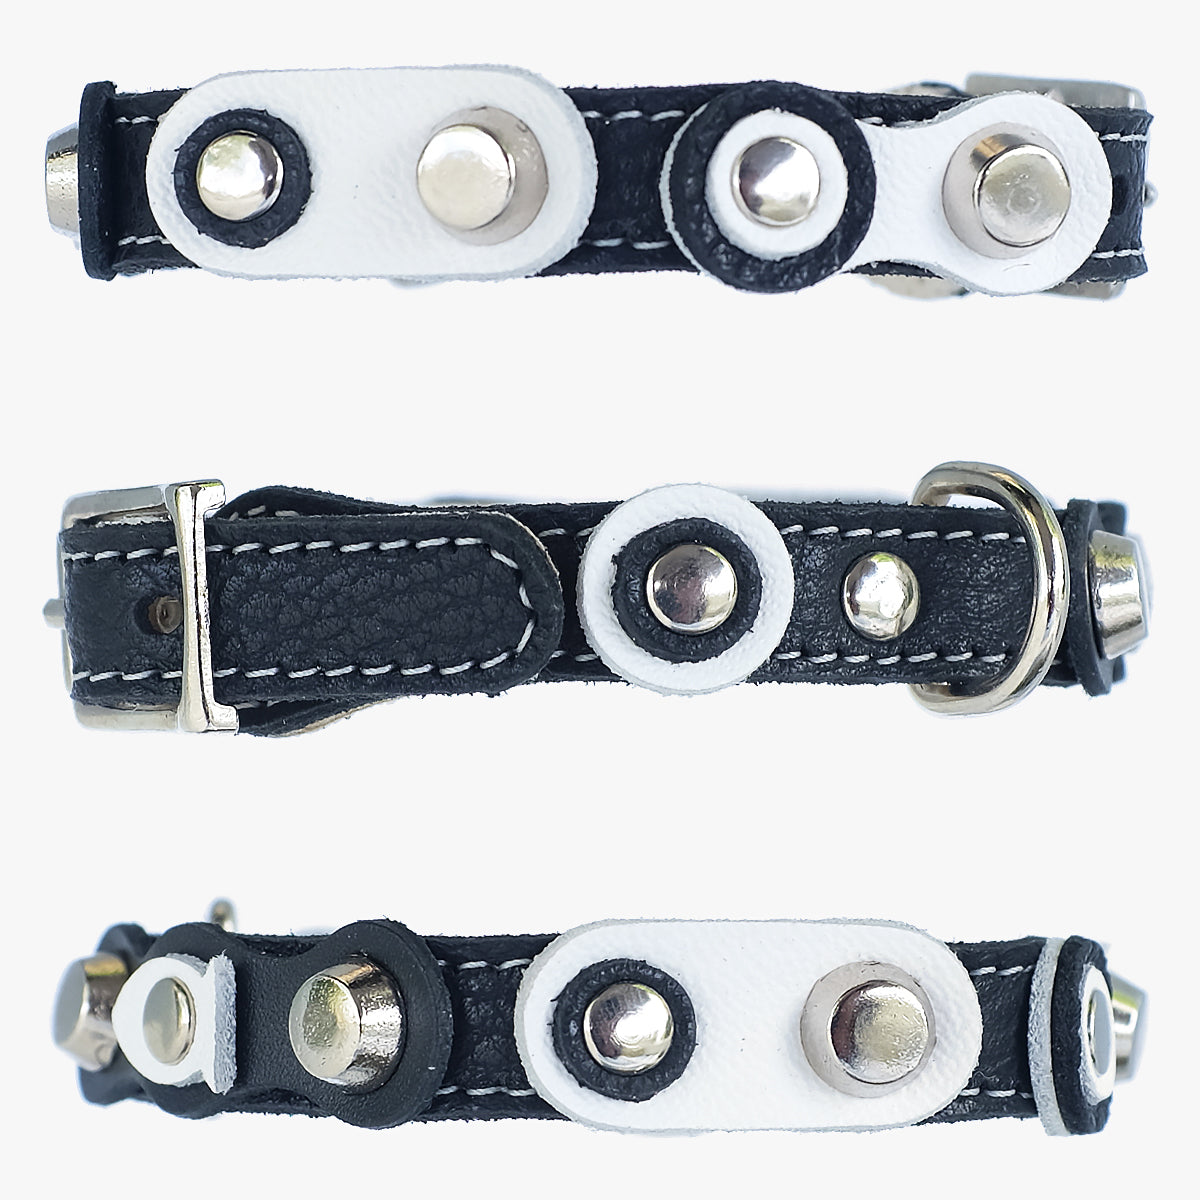 Superpipapo Buckle Leather Cat Collar, With Stars, Studs, & Black & White Leather Patches | at Made Moggie